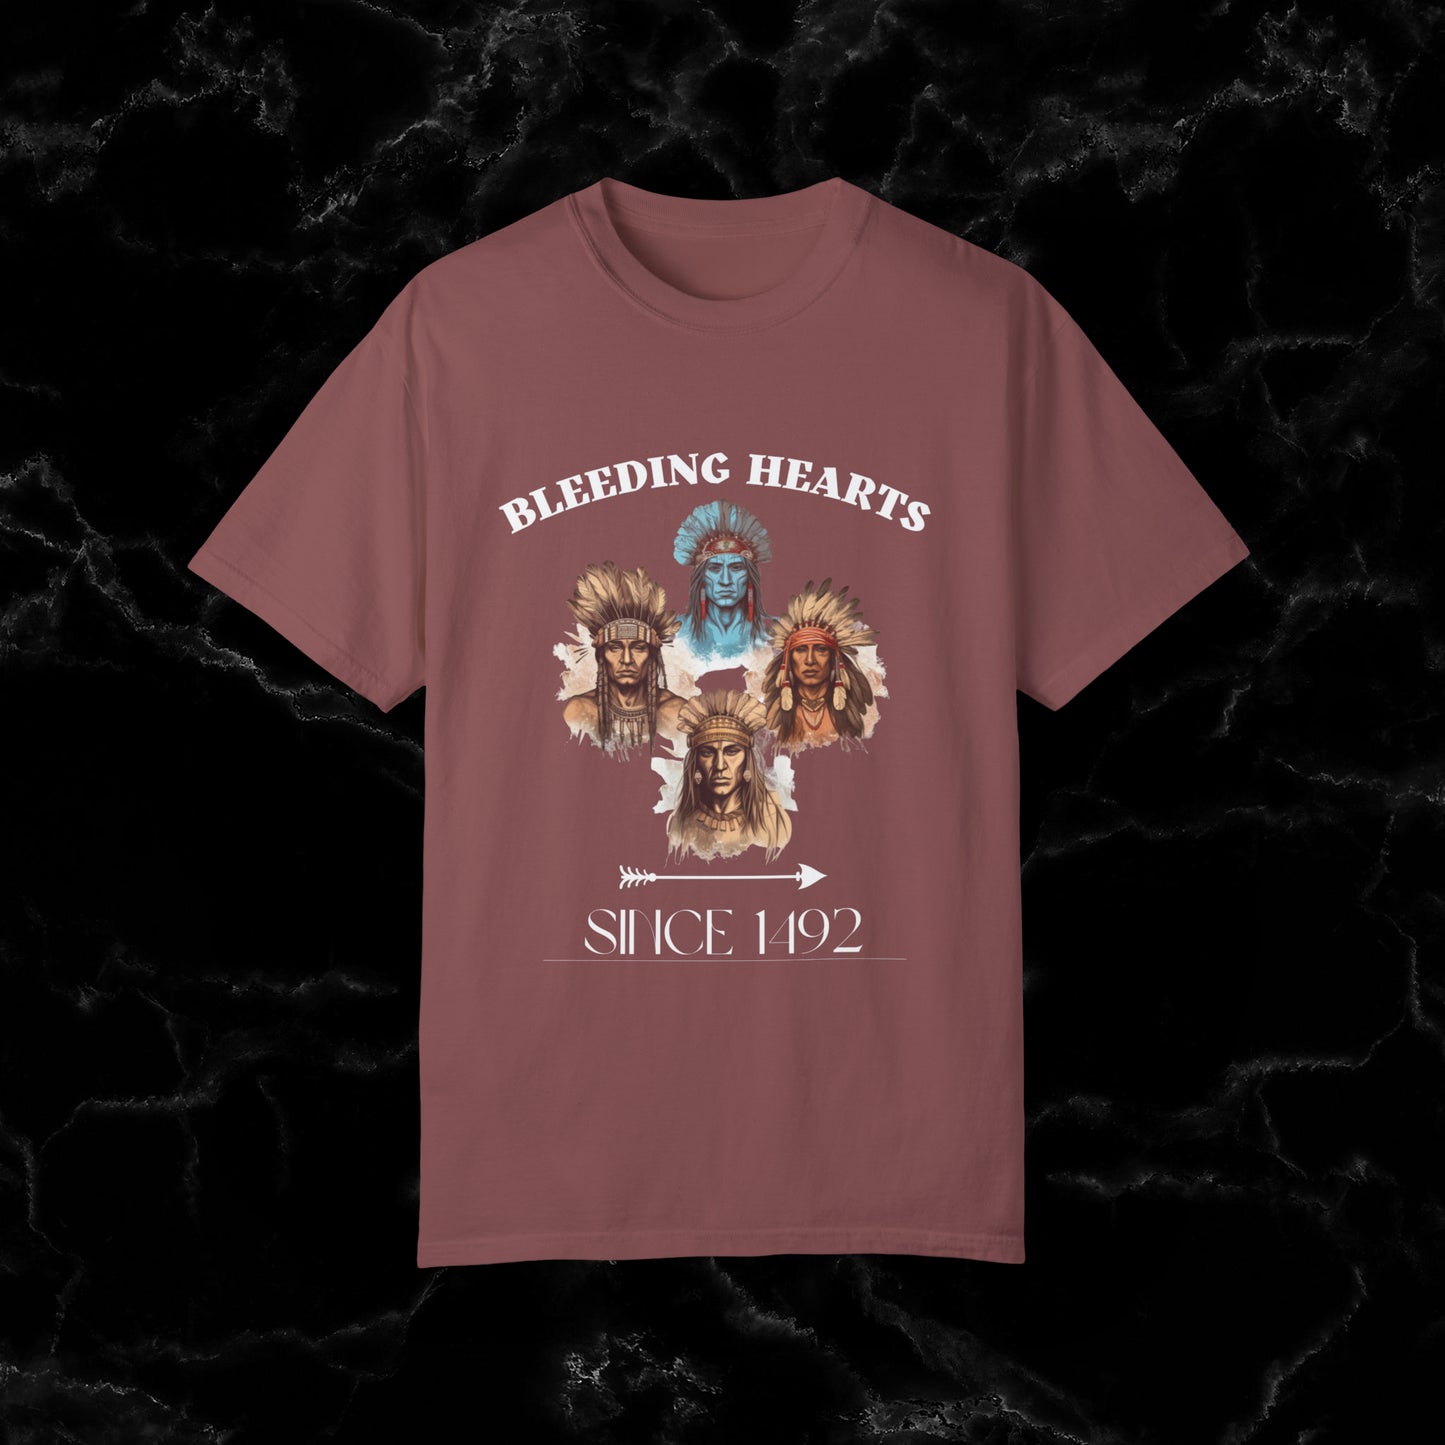 Native American Comfort Colors Shirt - Authentic Tribal Design, Nature-Inspired Apparel, 'Bleeding Hearts since 1492 T-Shirt Brick S 